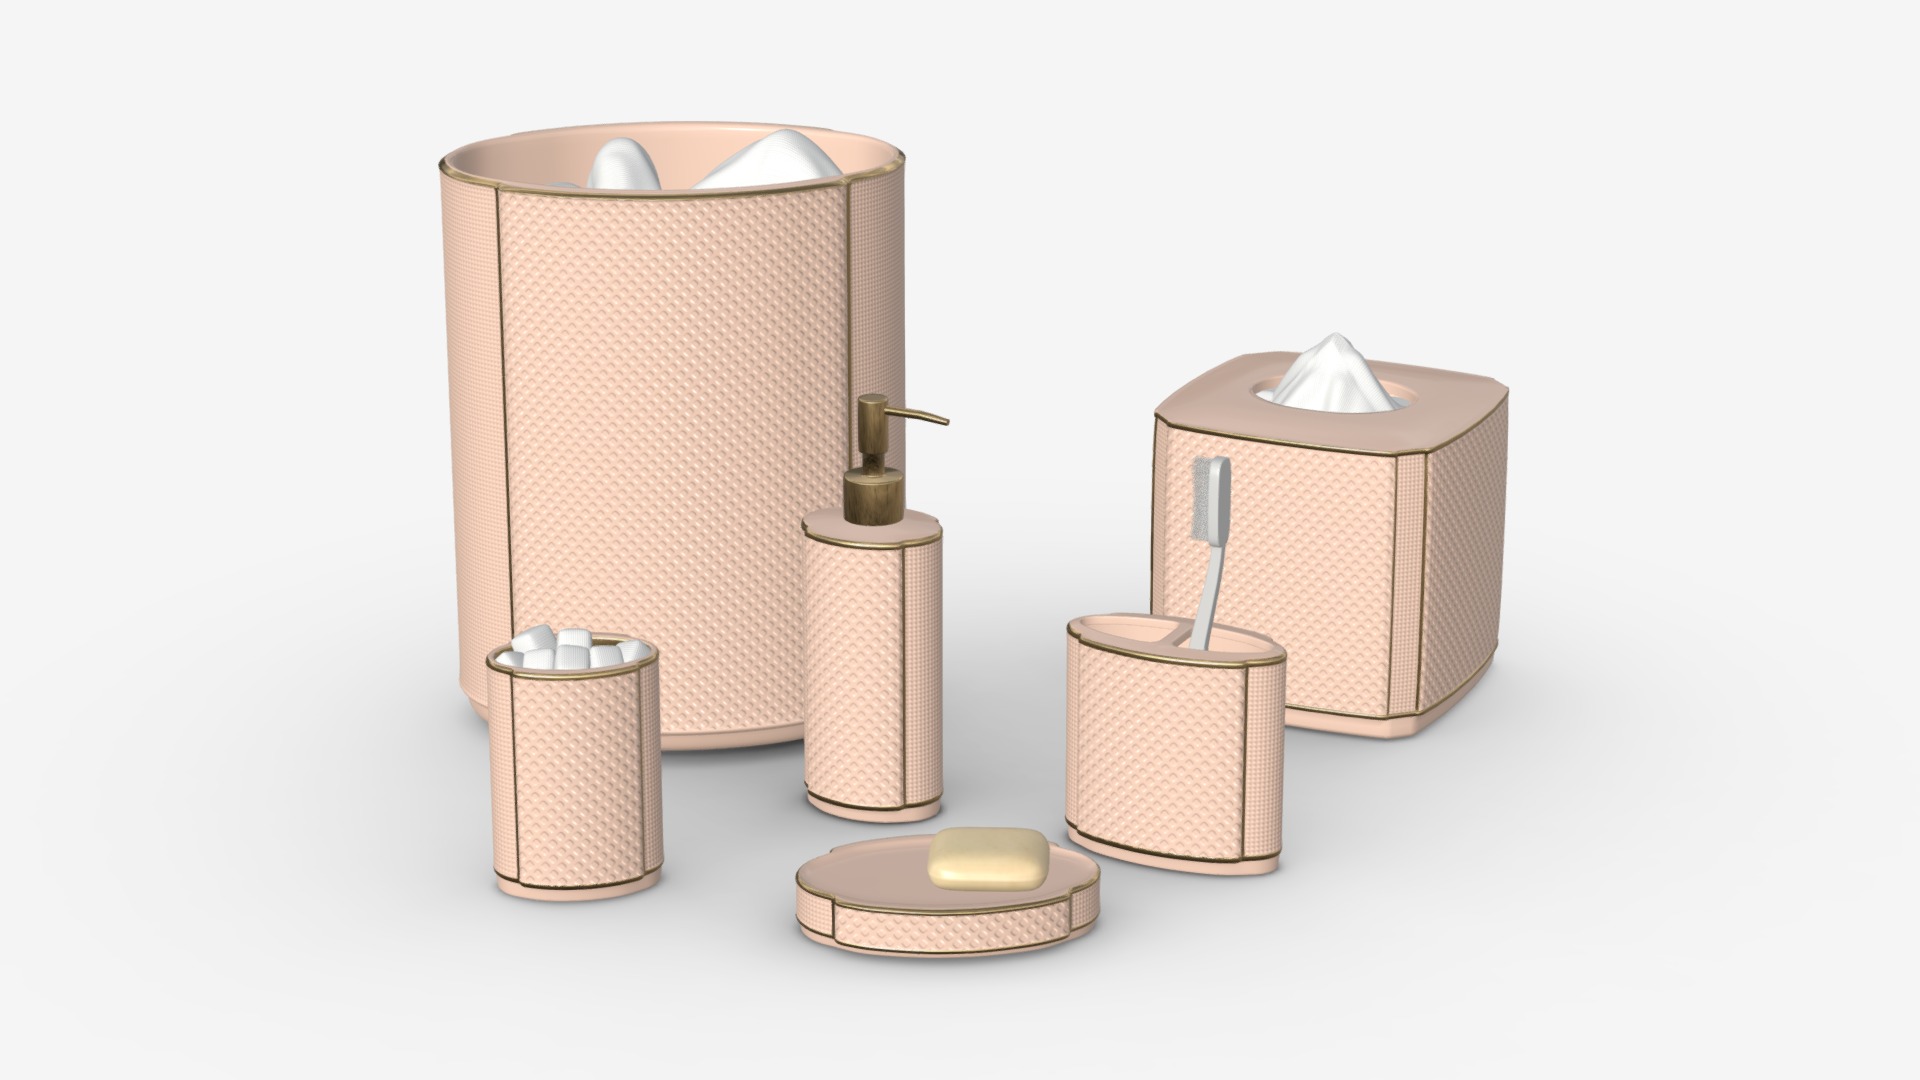 3D model Furla Cream Damask Ceramic Bath Accessories - This is a 3D model of the Furla Cream Damask Ceramic Bath Accessories. The 3D model is about a group of small containers.